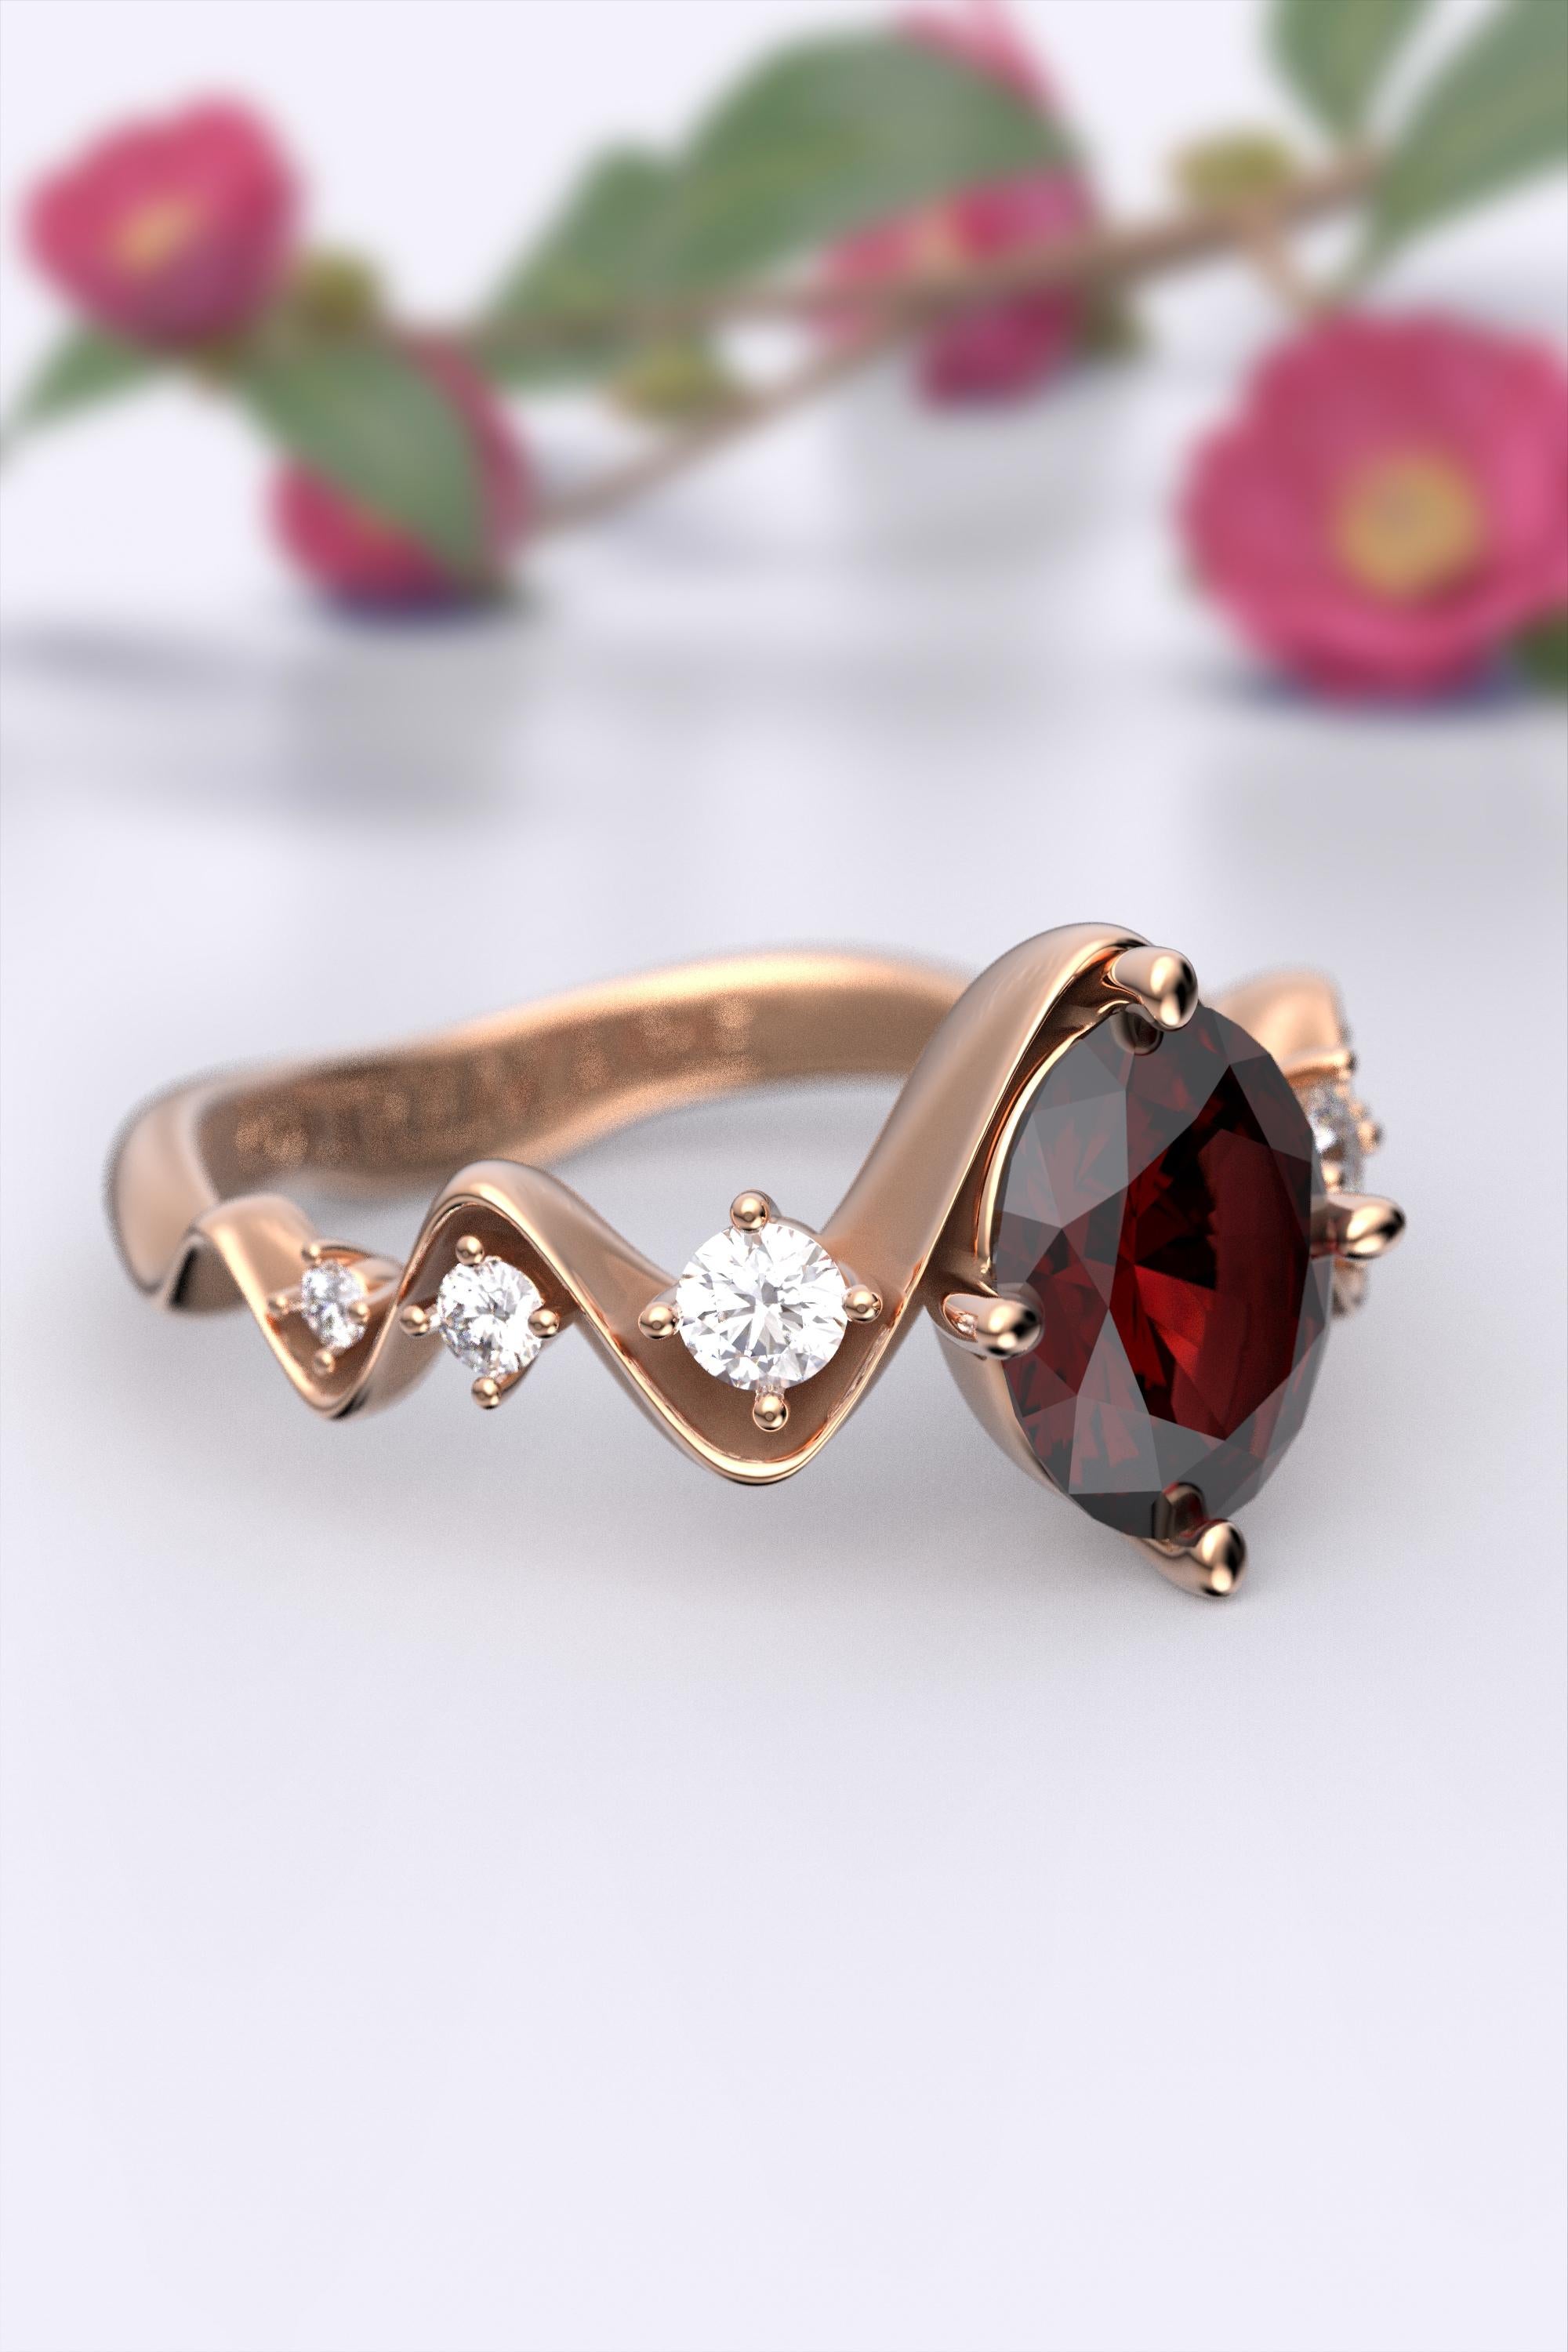 For Sale:  Garnet and Diamonds Engagement Ring Made in Italy by Oltremare Gioielli 18k Gold 12